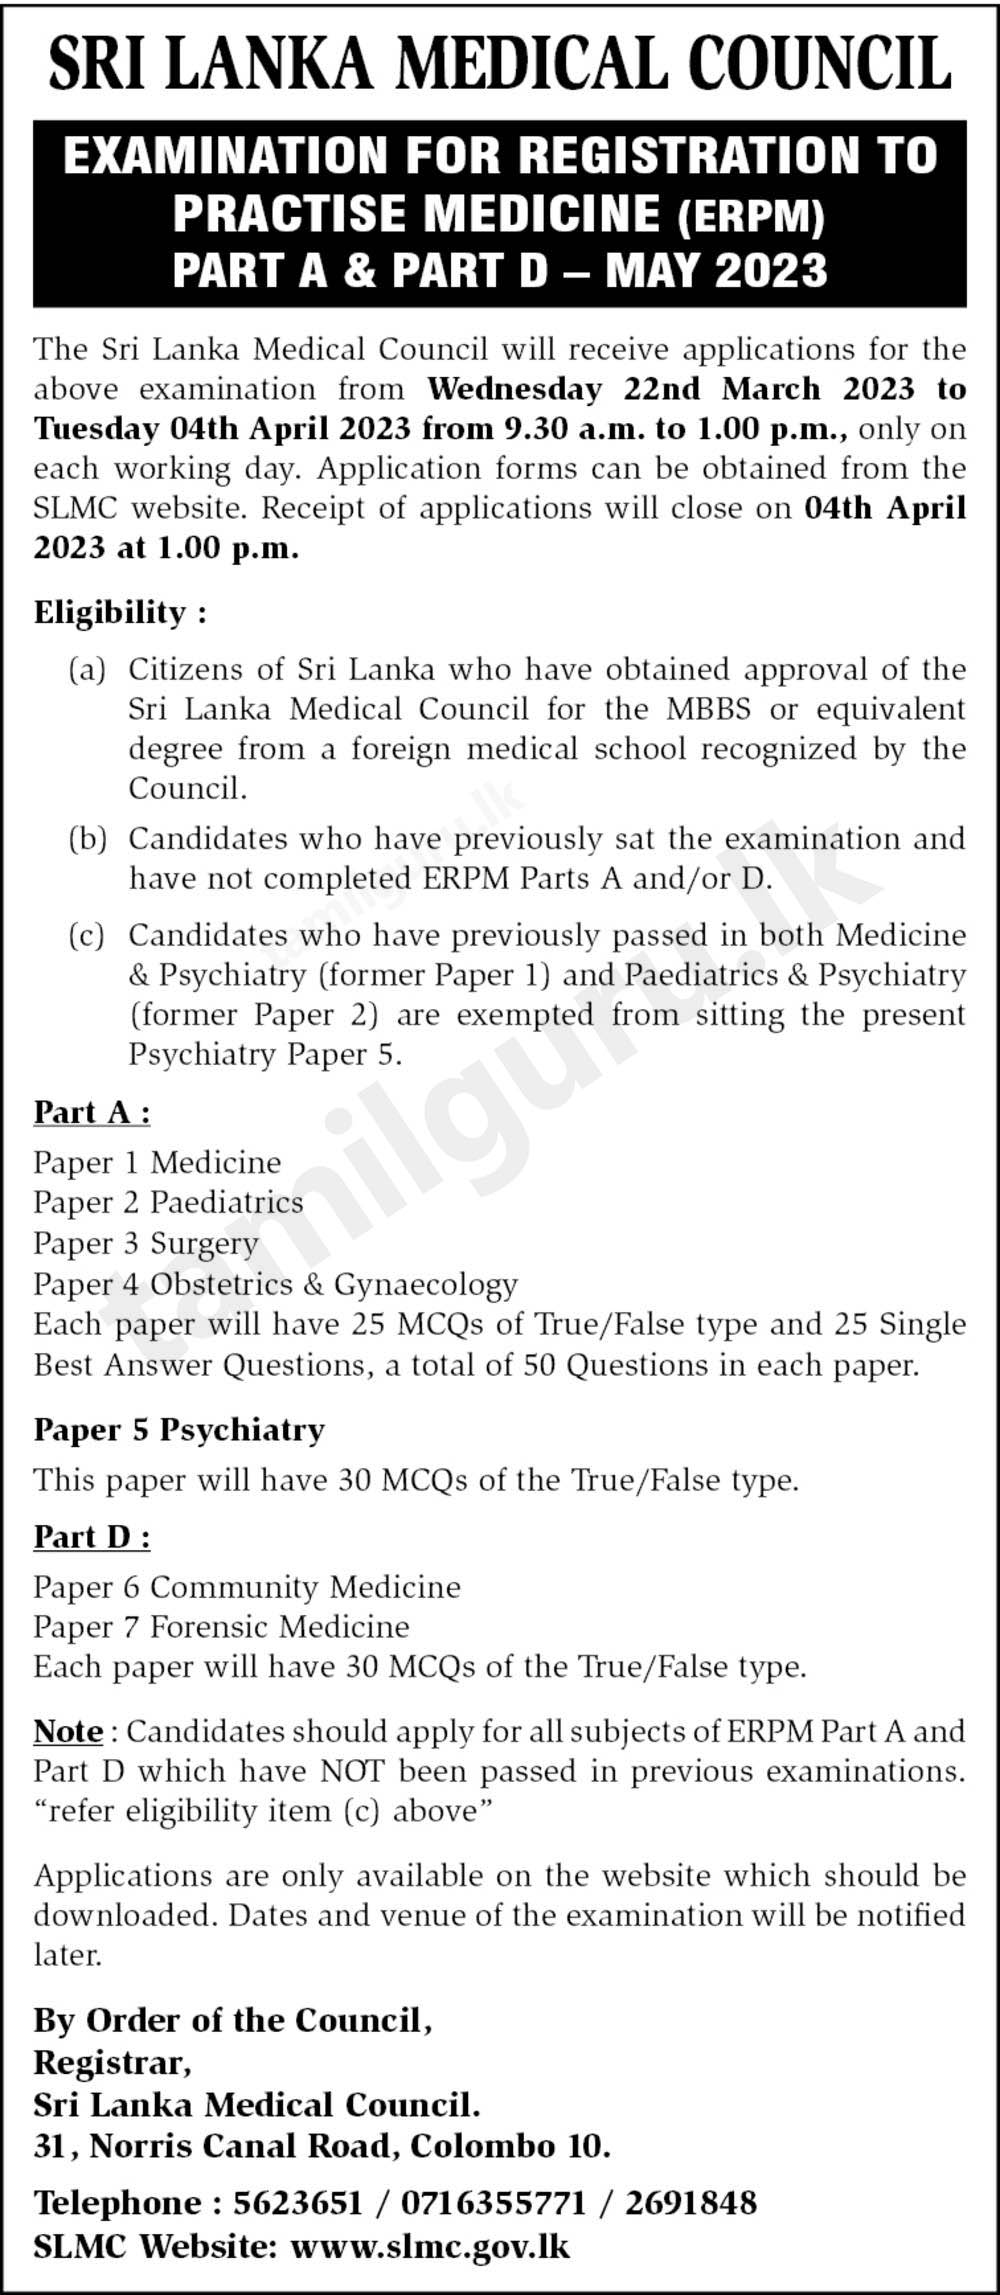 Examination for Registration to Practise Medicine (ERPM) Part A & Part D - May 2023 SLMC